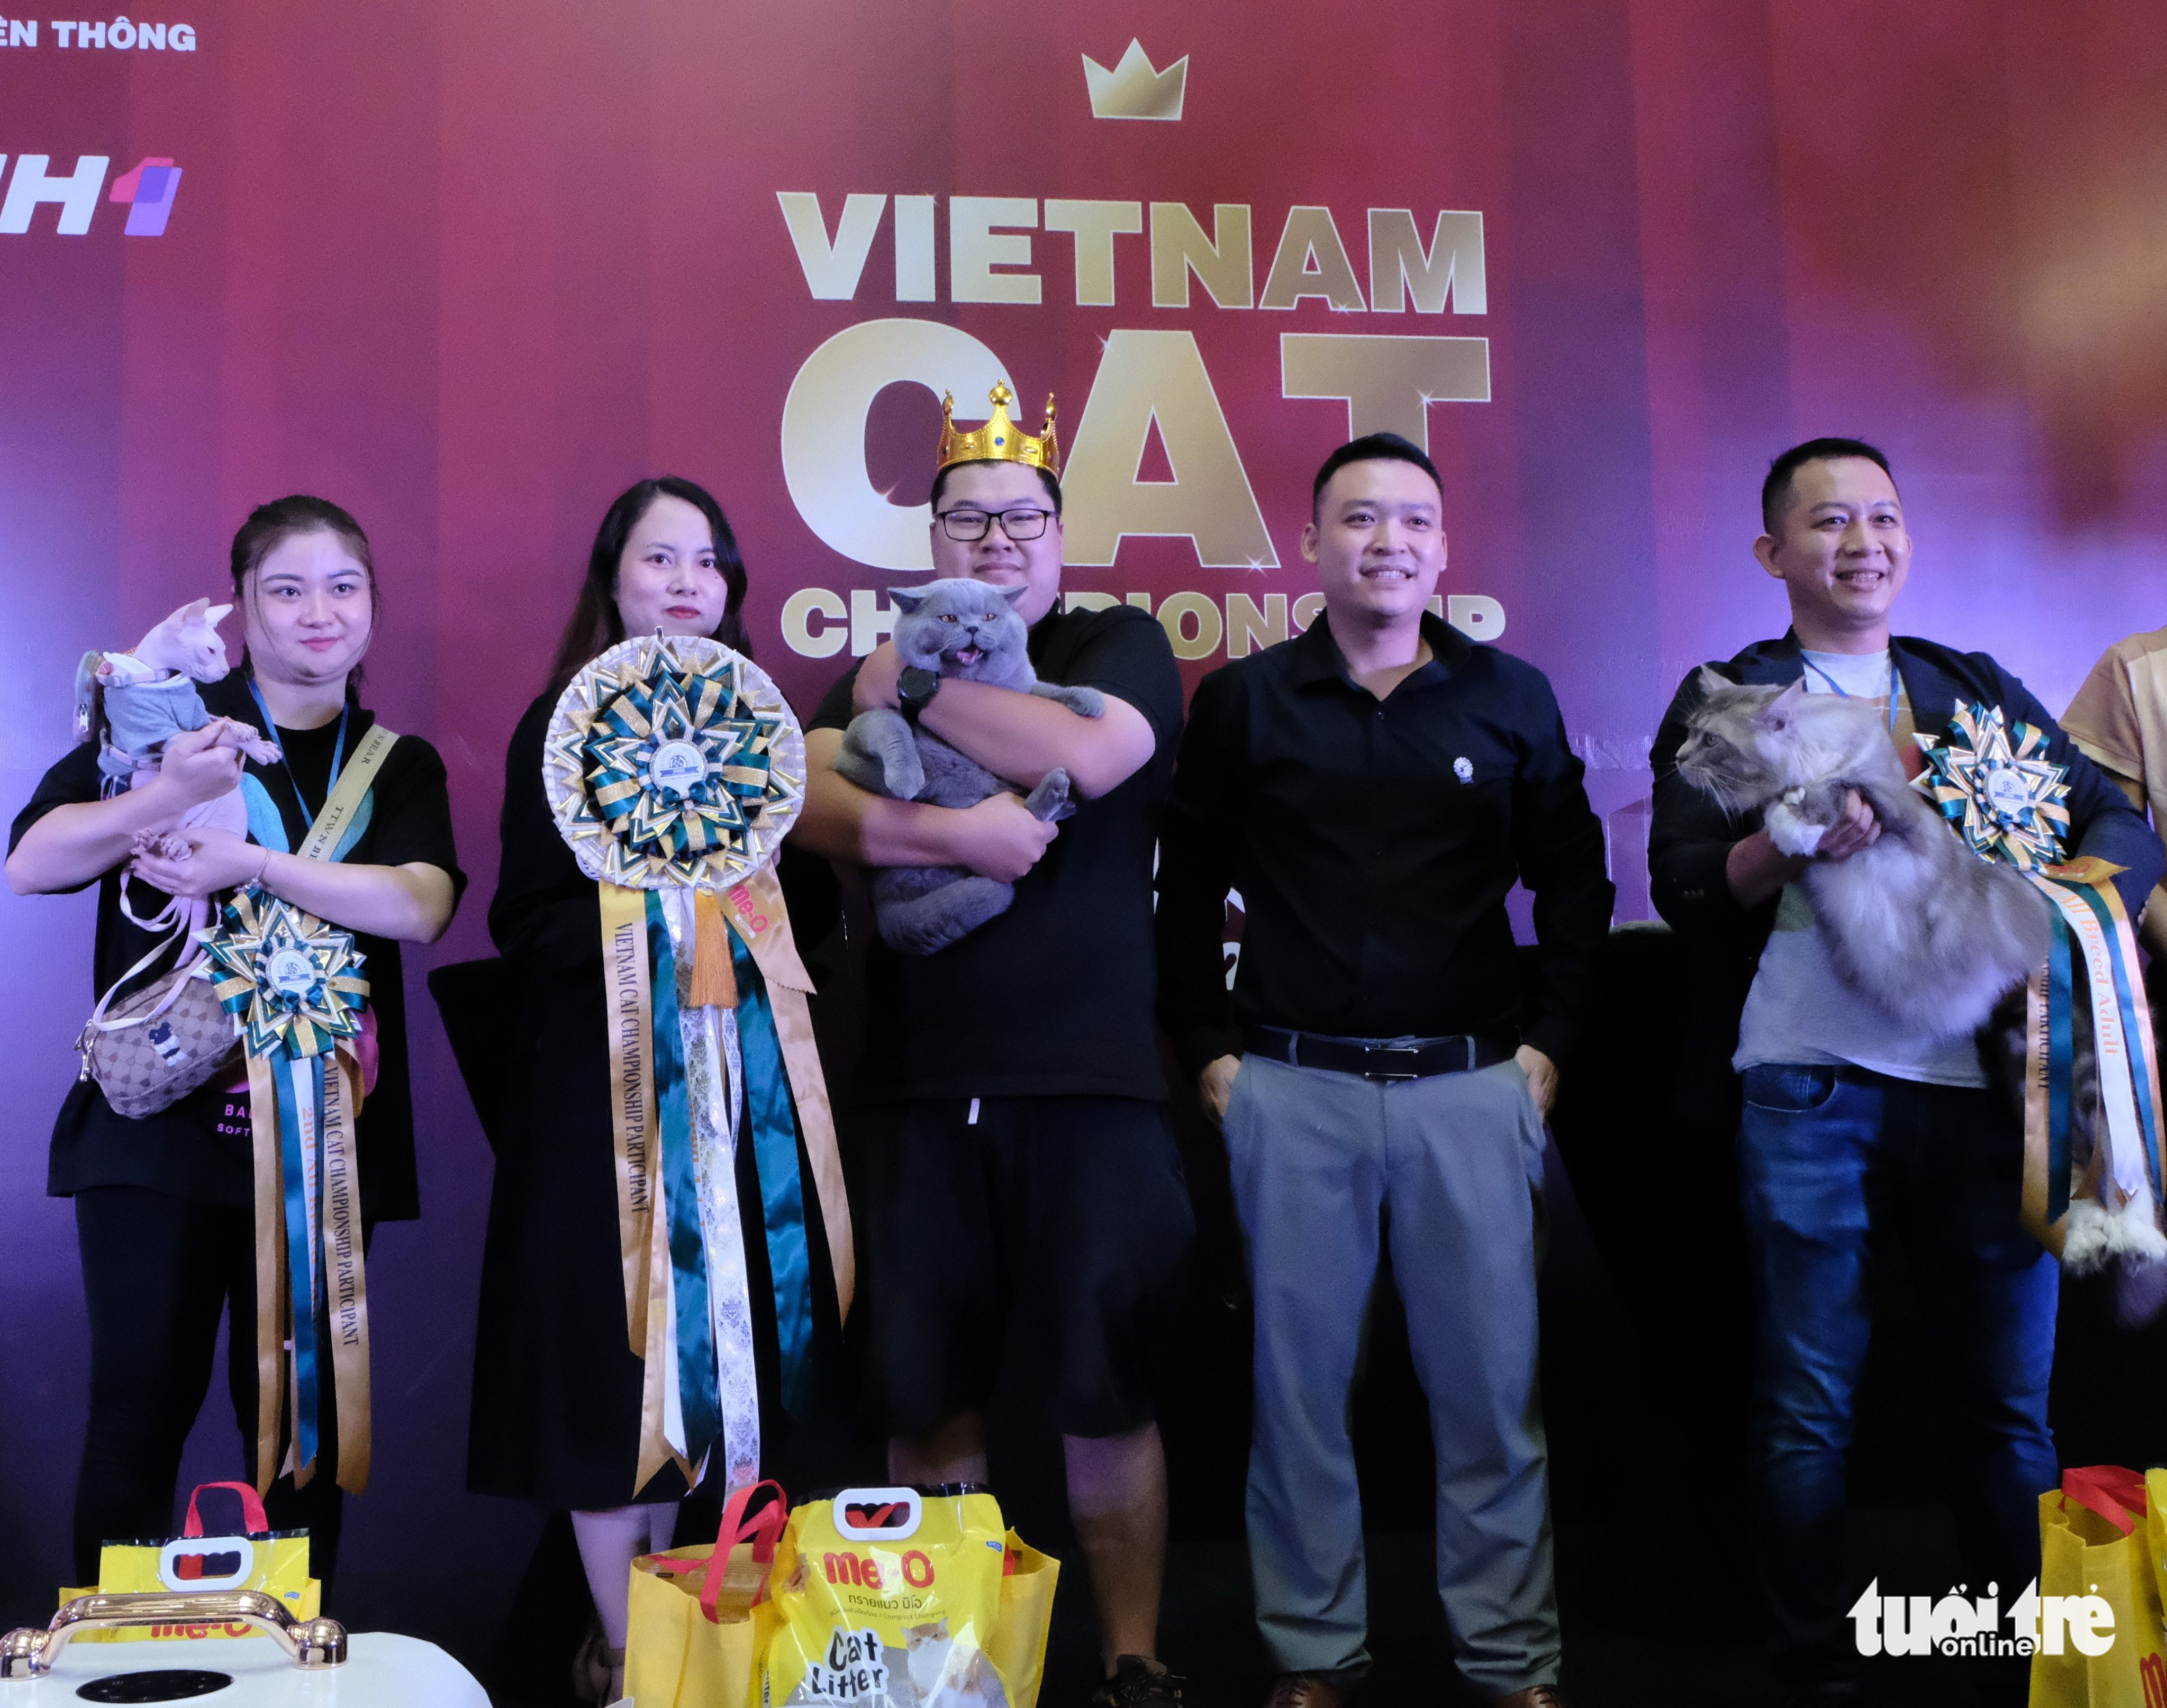 The three most beautiful cats receive their prizes at the Vietnam cat championship in Hanoi, November 27, 2022. Photo: Lam Ngoc / Tuoi Tre